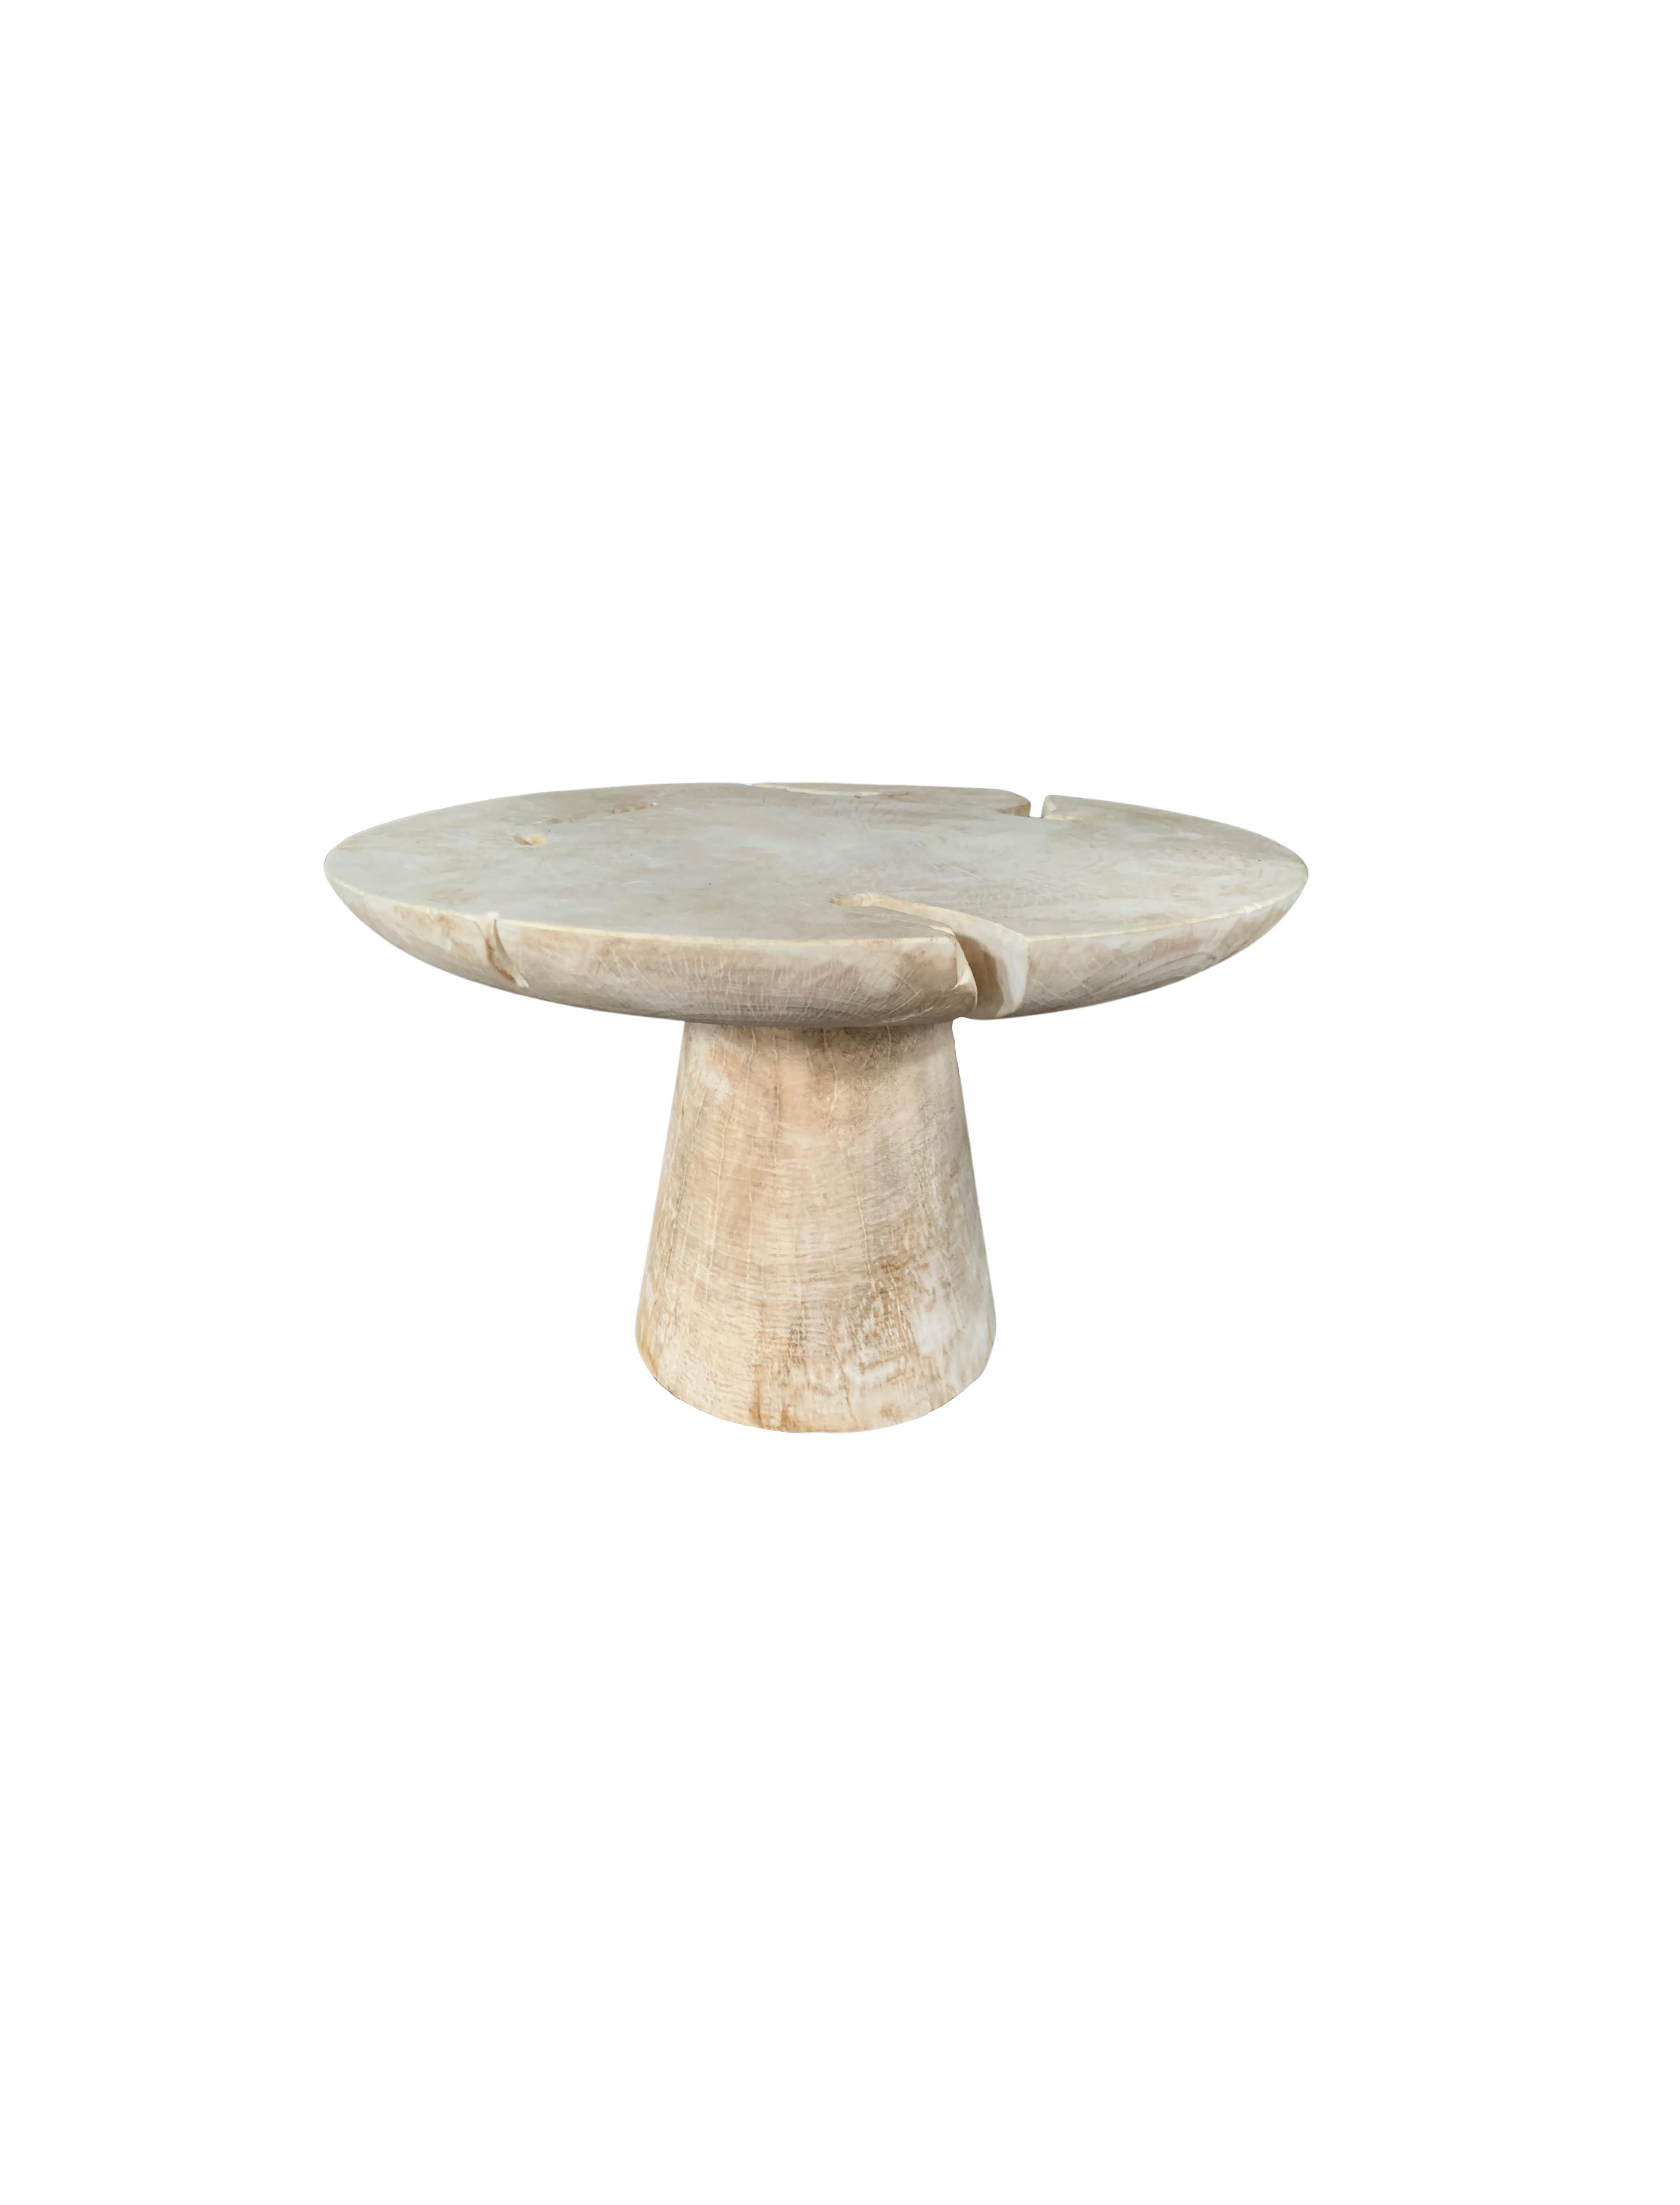 Organic Modern Sculptural Round Table Crafted from Mango Wood, Modern Organic